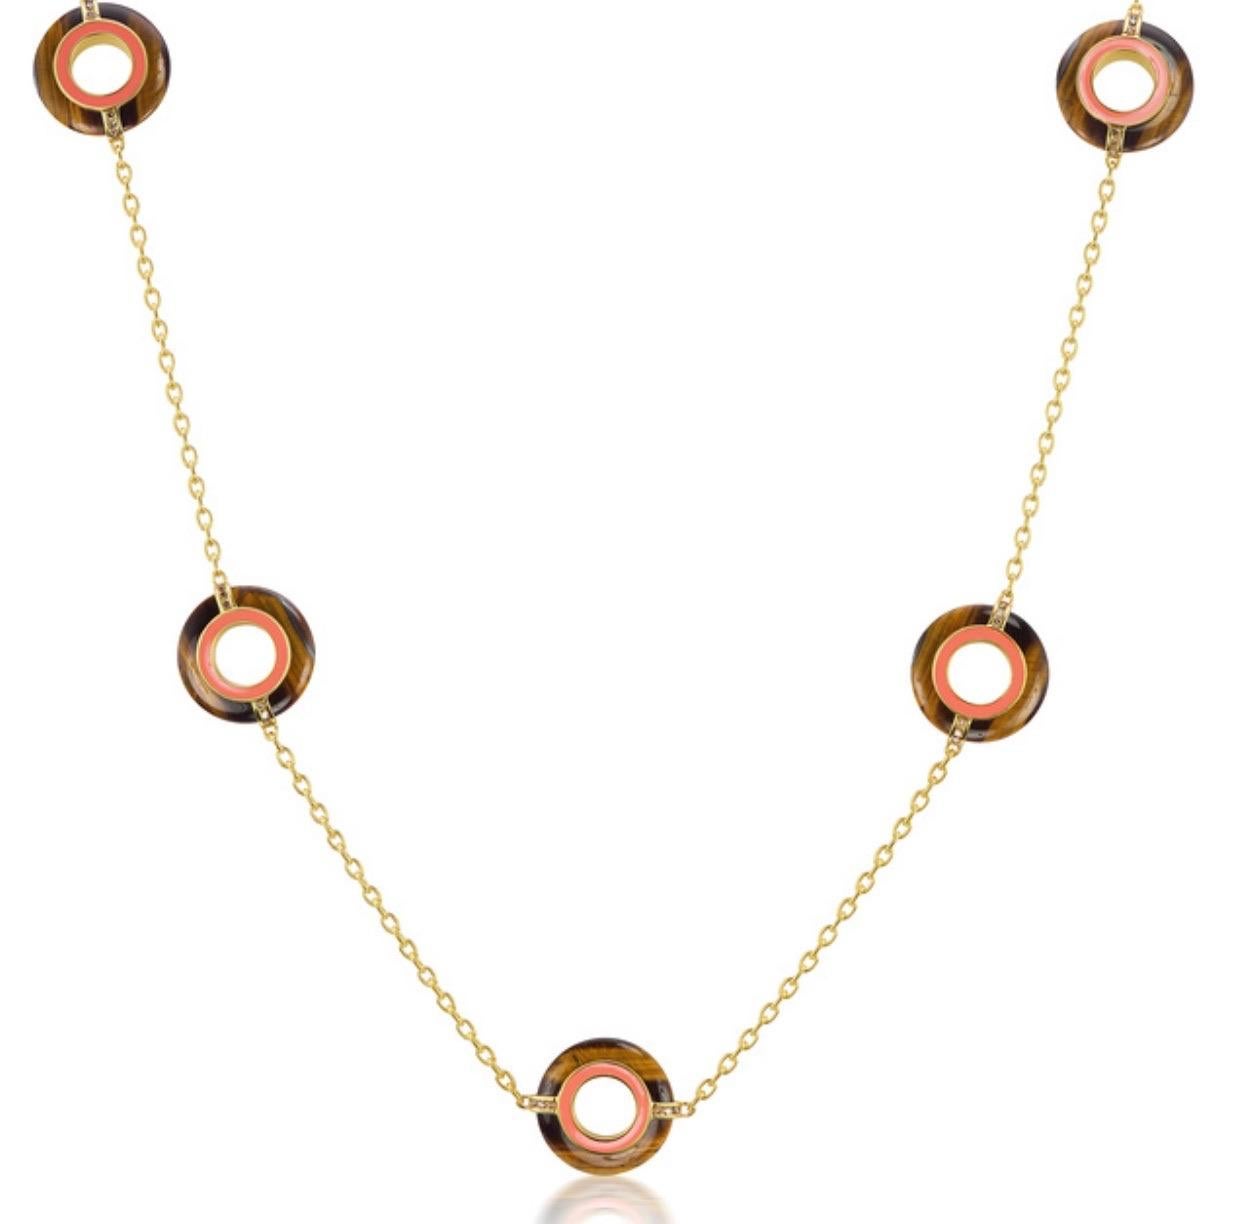 Andrew Glassford's Donut Series III 26 inch long necklace makes a beautiful statement piece that can be worn two ways. Five 20mm Tiger-Eye Chalcedony discs weighing 41 carats anchor this necklace. On one side of necklace are .40 carats of Champagne